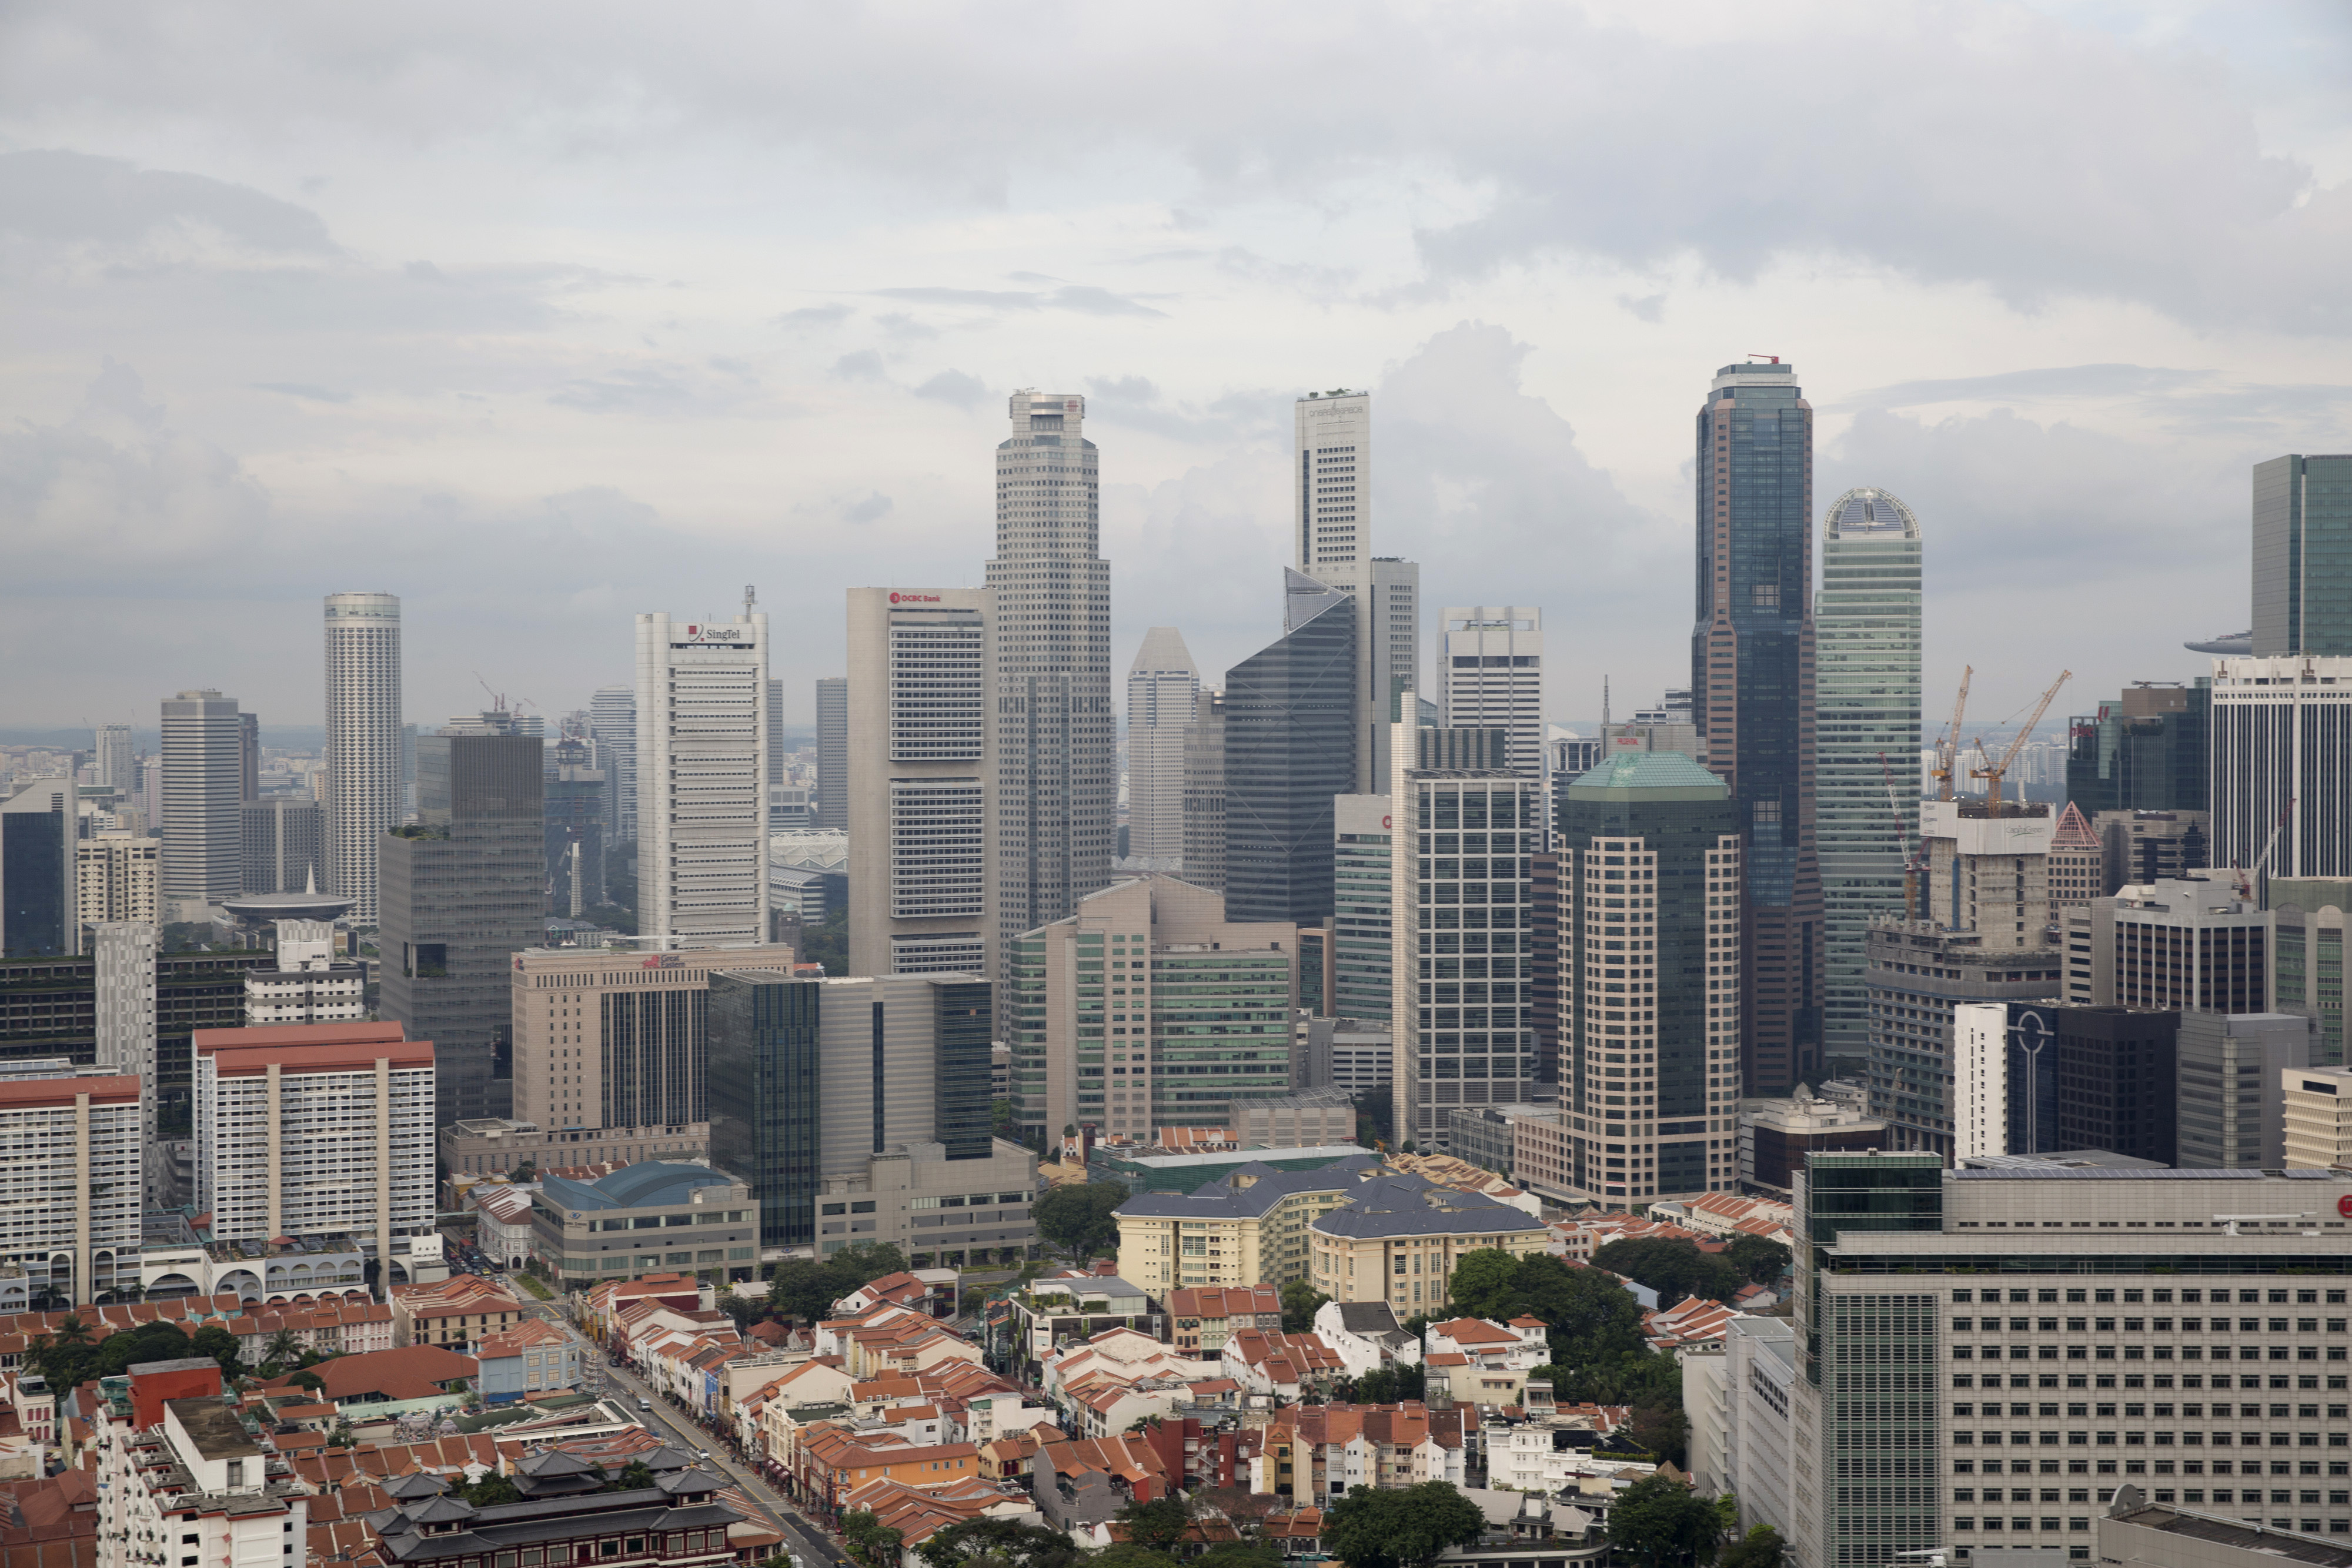 Singapore's approach focuses more on investing for the future instead of putting money directly in people's pockets, critics said. Photo: Bloomberg